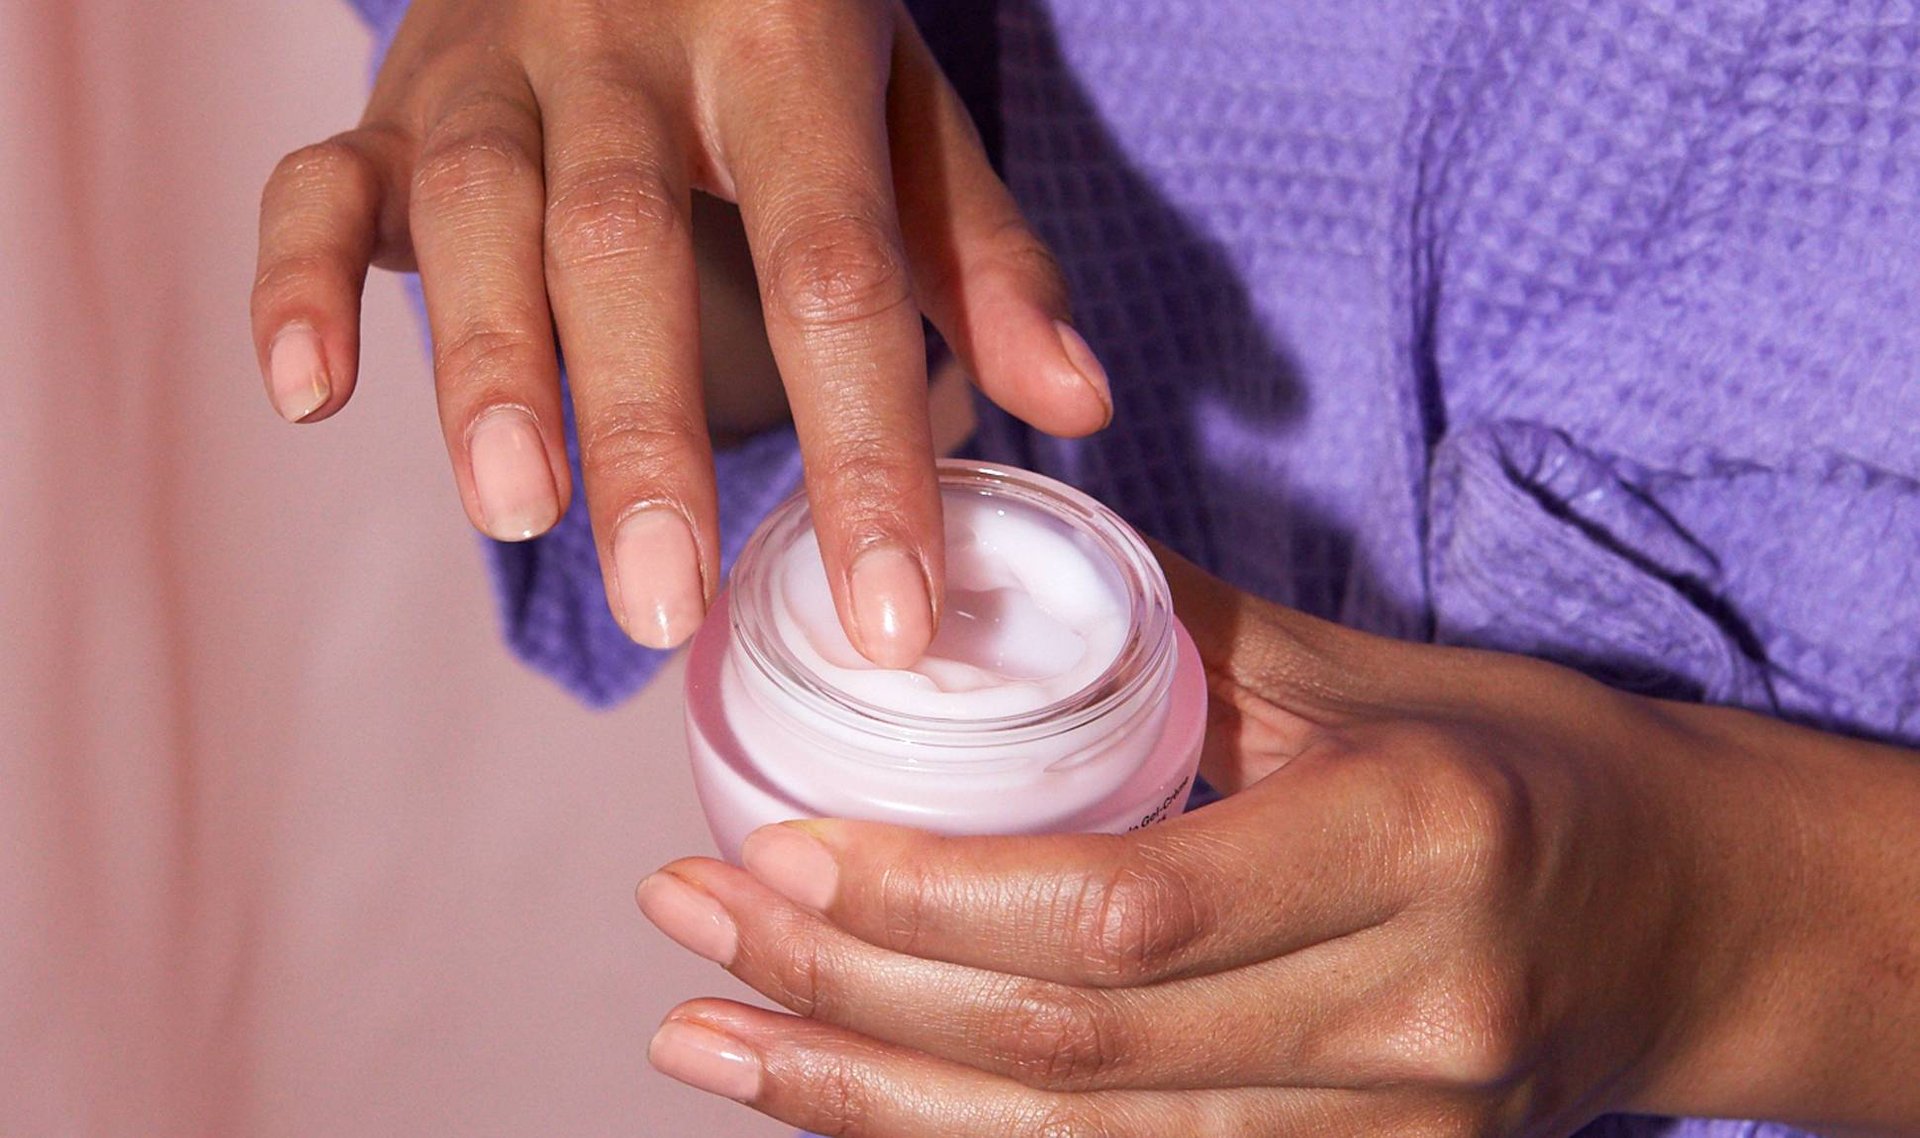 6 Common Moisturizer Mistakes and How to Avoid Them